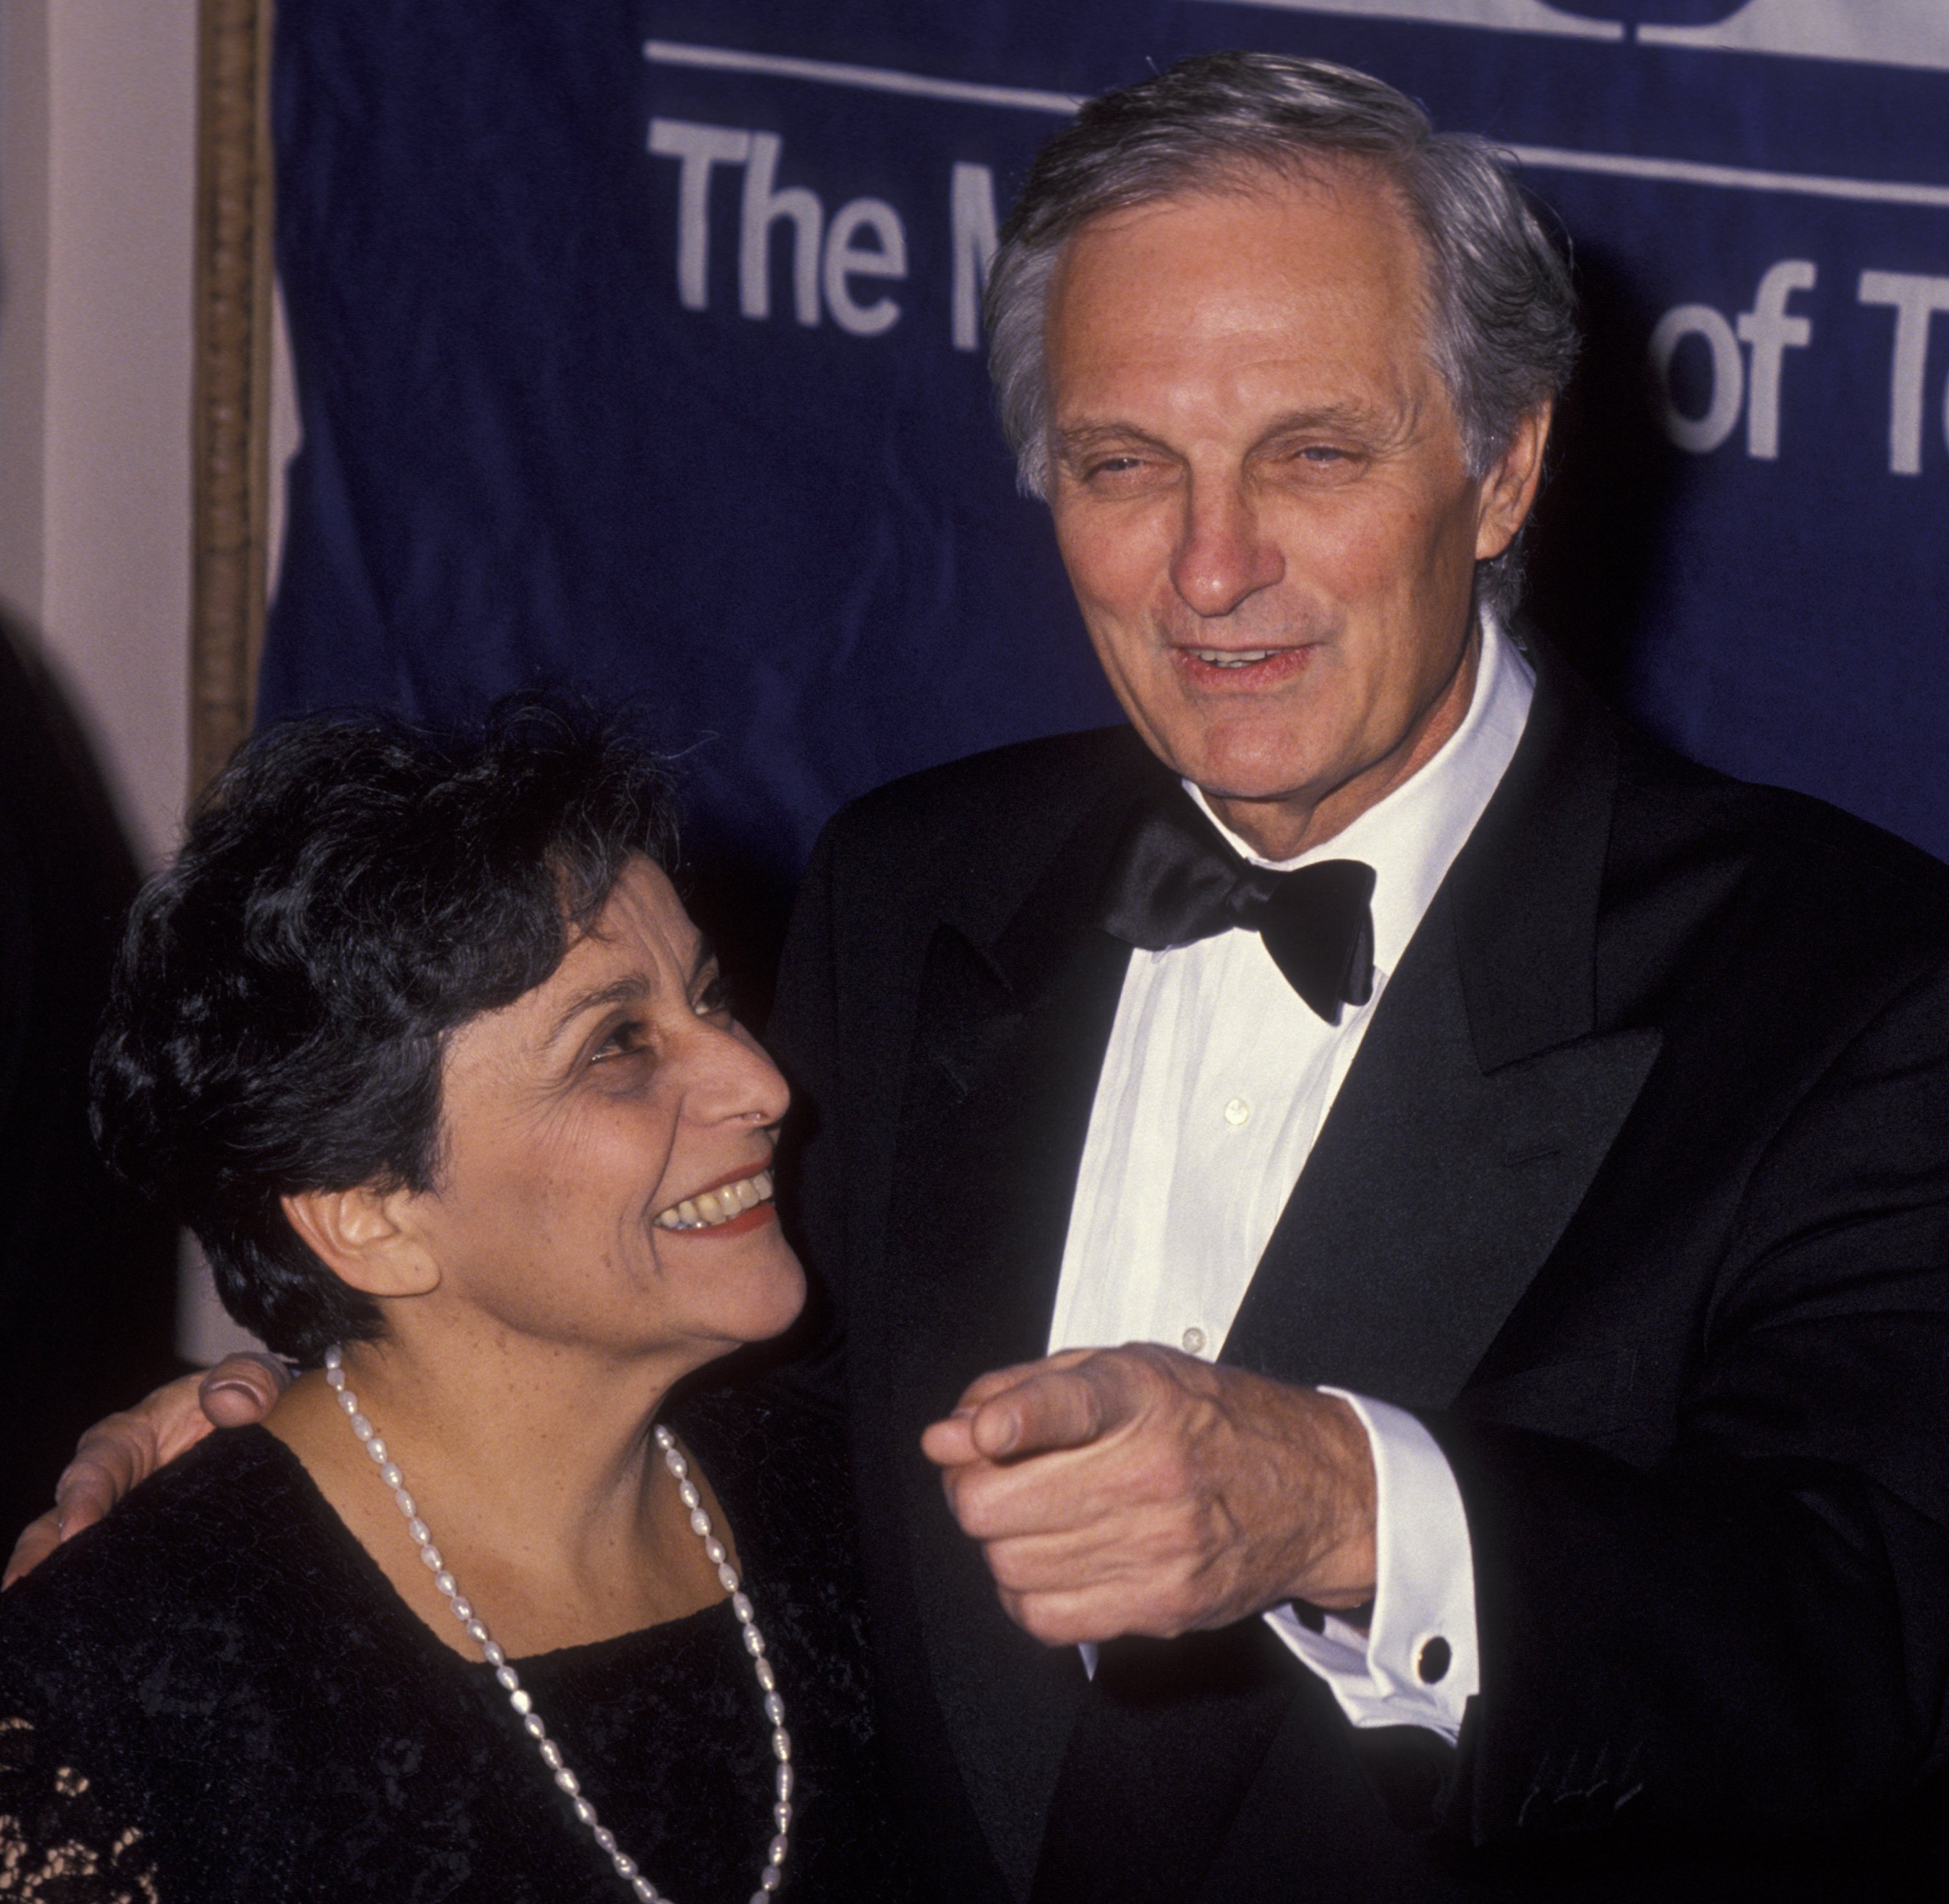 Alan Alda and Arlene Weiss attend Museum of Television and Radio Gala at the Waldorf Astoria Hotel on February 9, 1995 in New York City | Source: Getty Images 